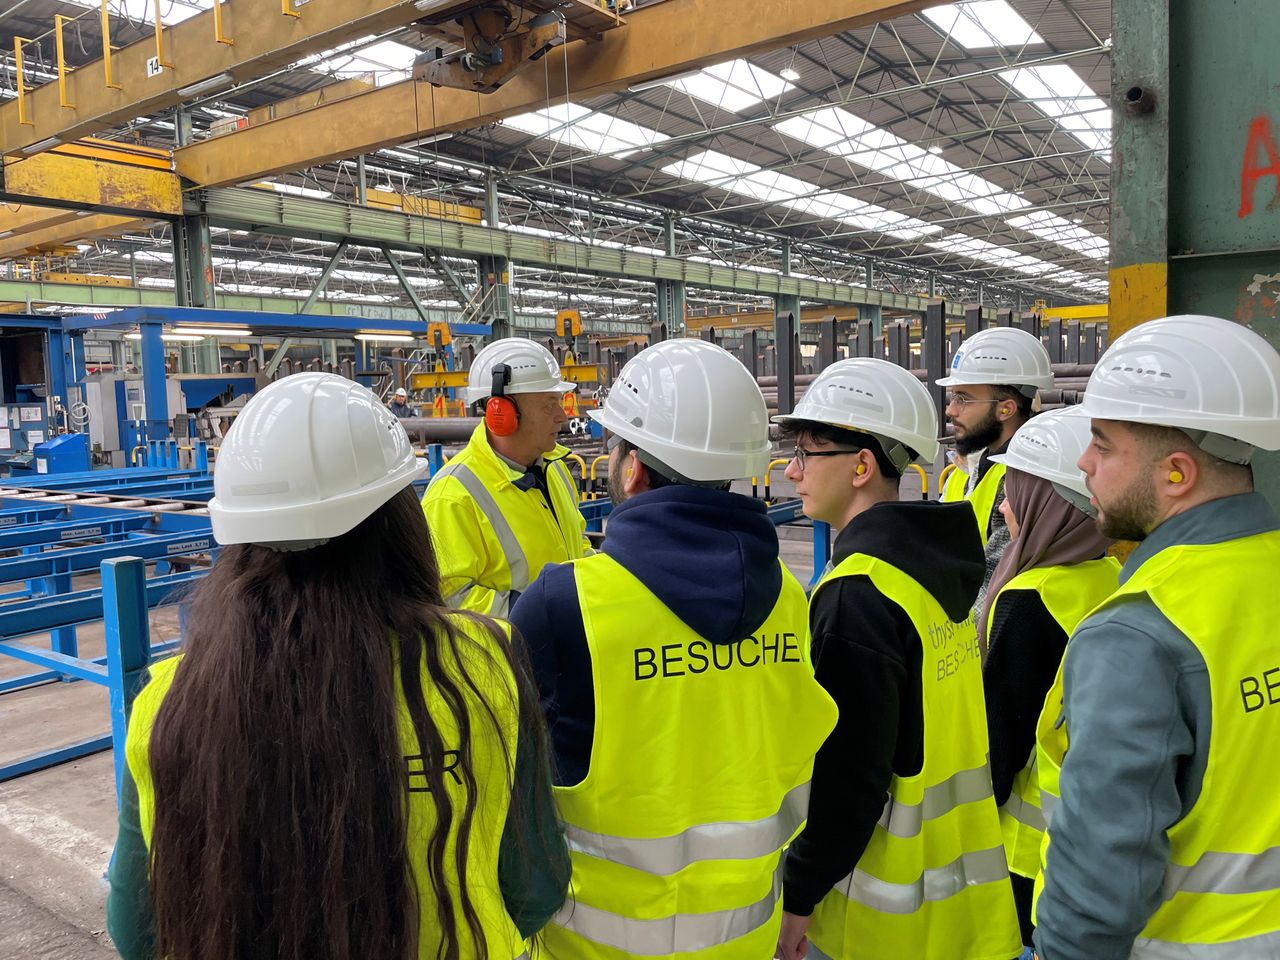 JOBLINGE during a plant tour at thyssenkrupp Materials Services 